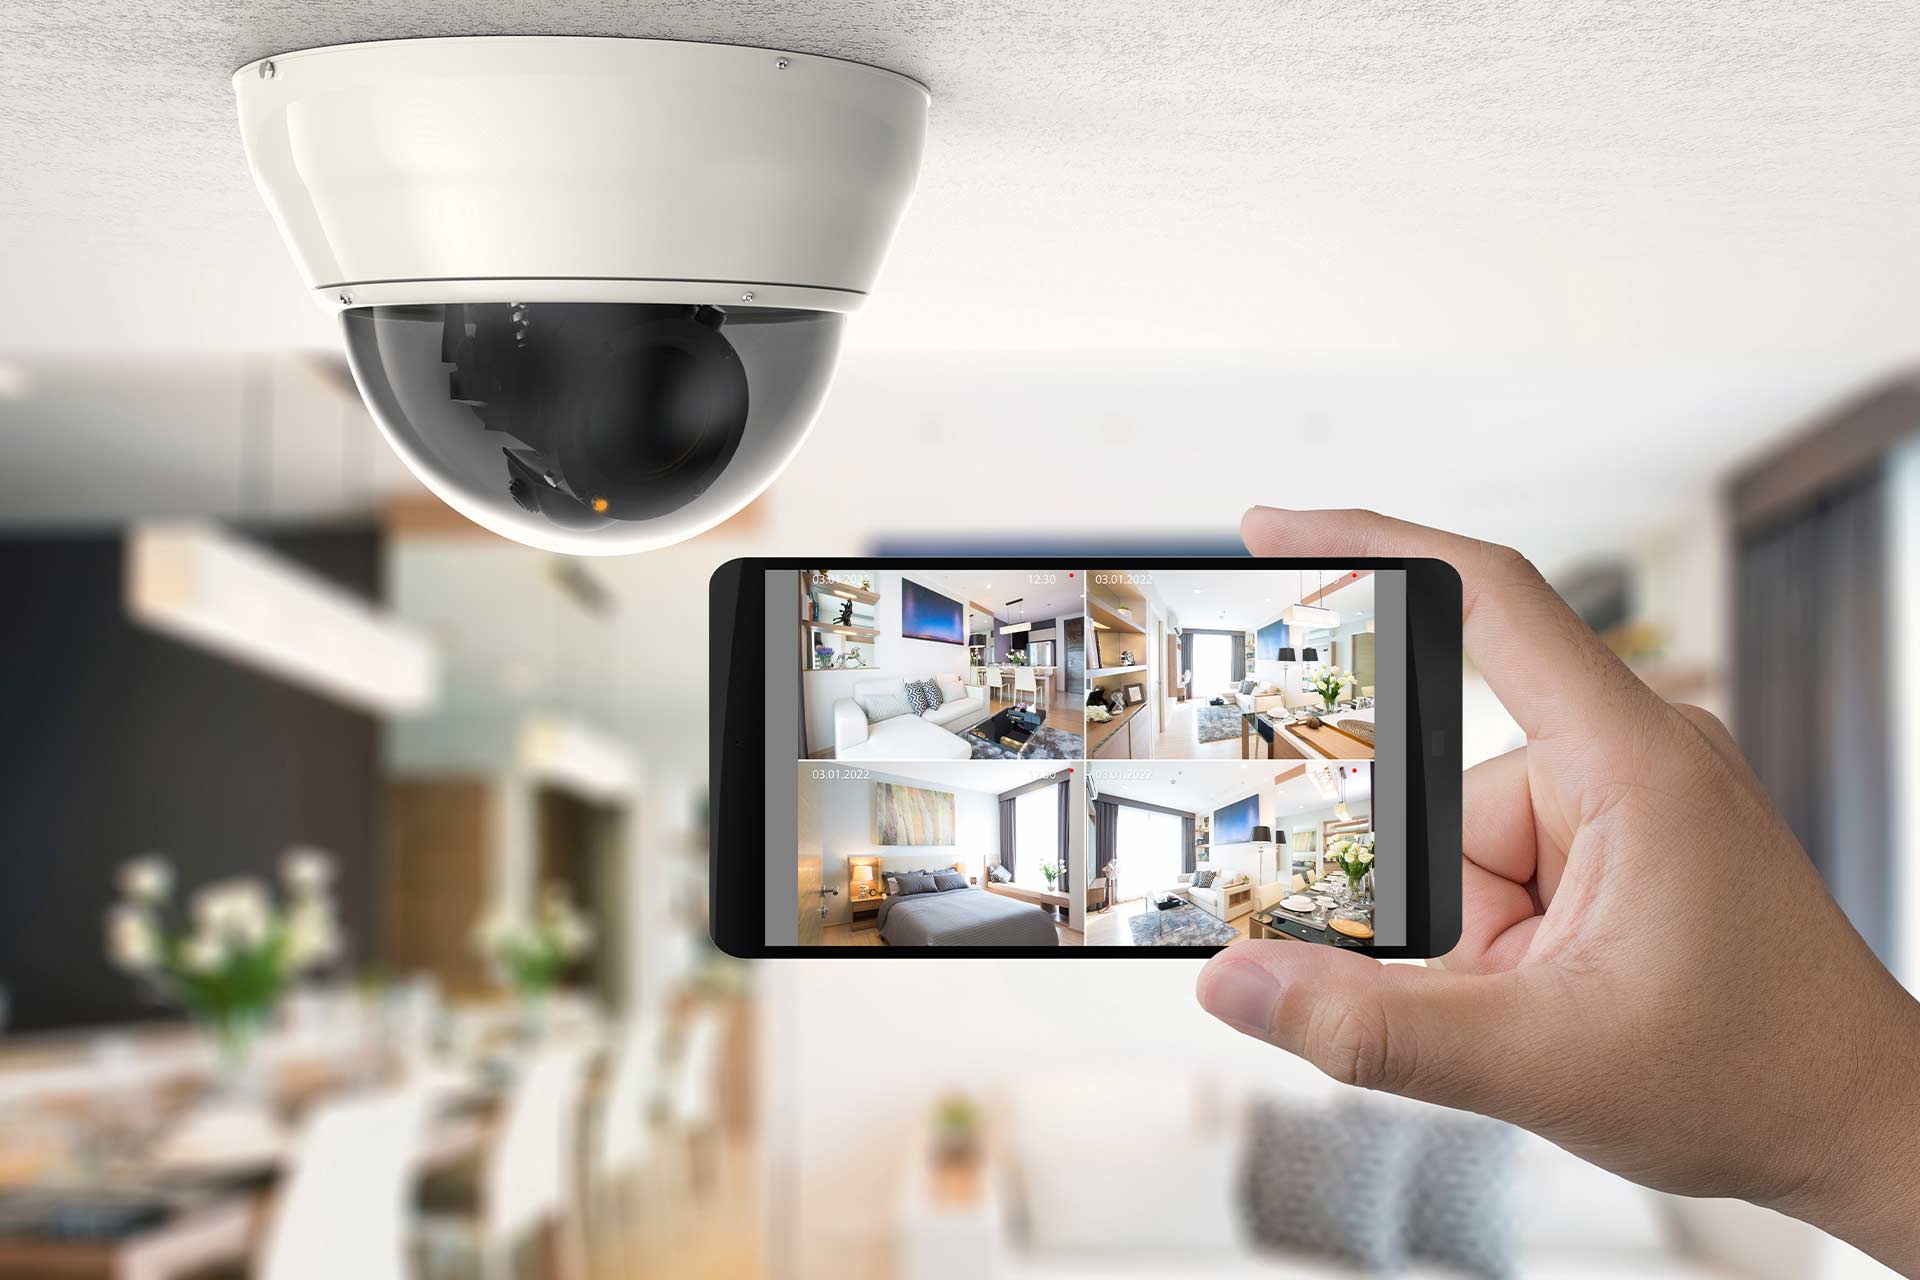 Choosing the Right CCTV System for Your Home